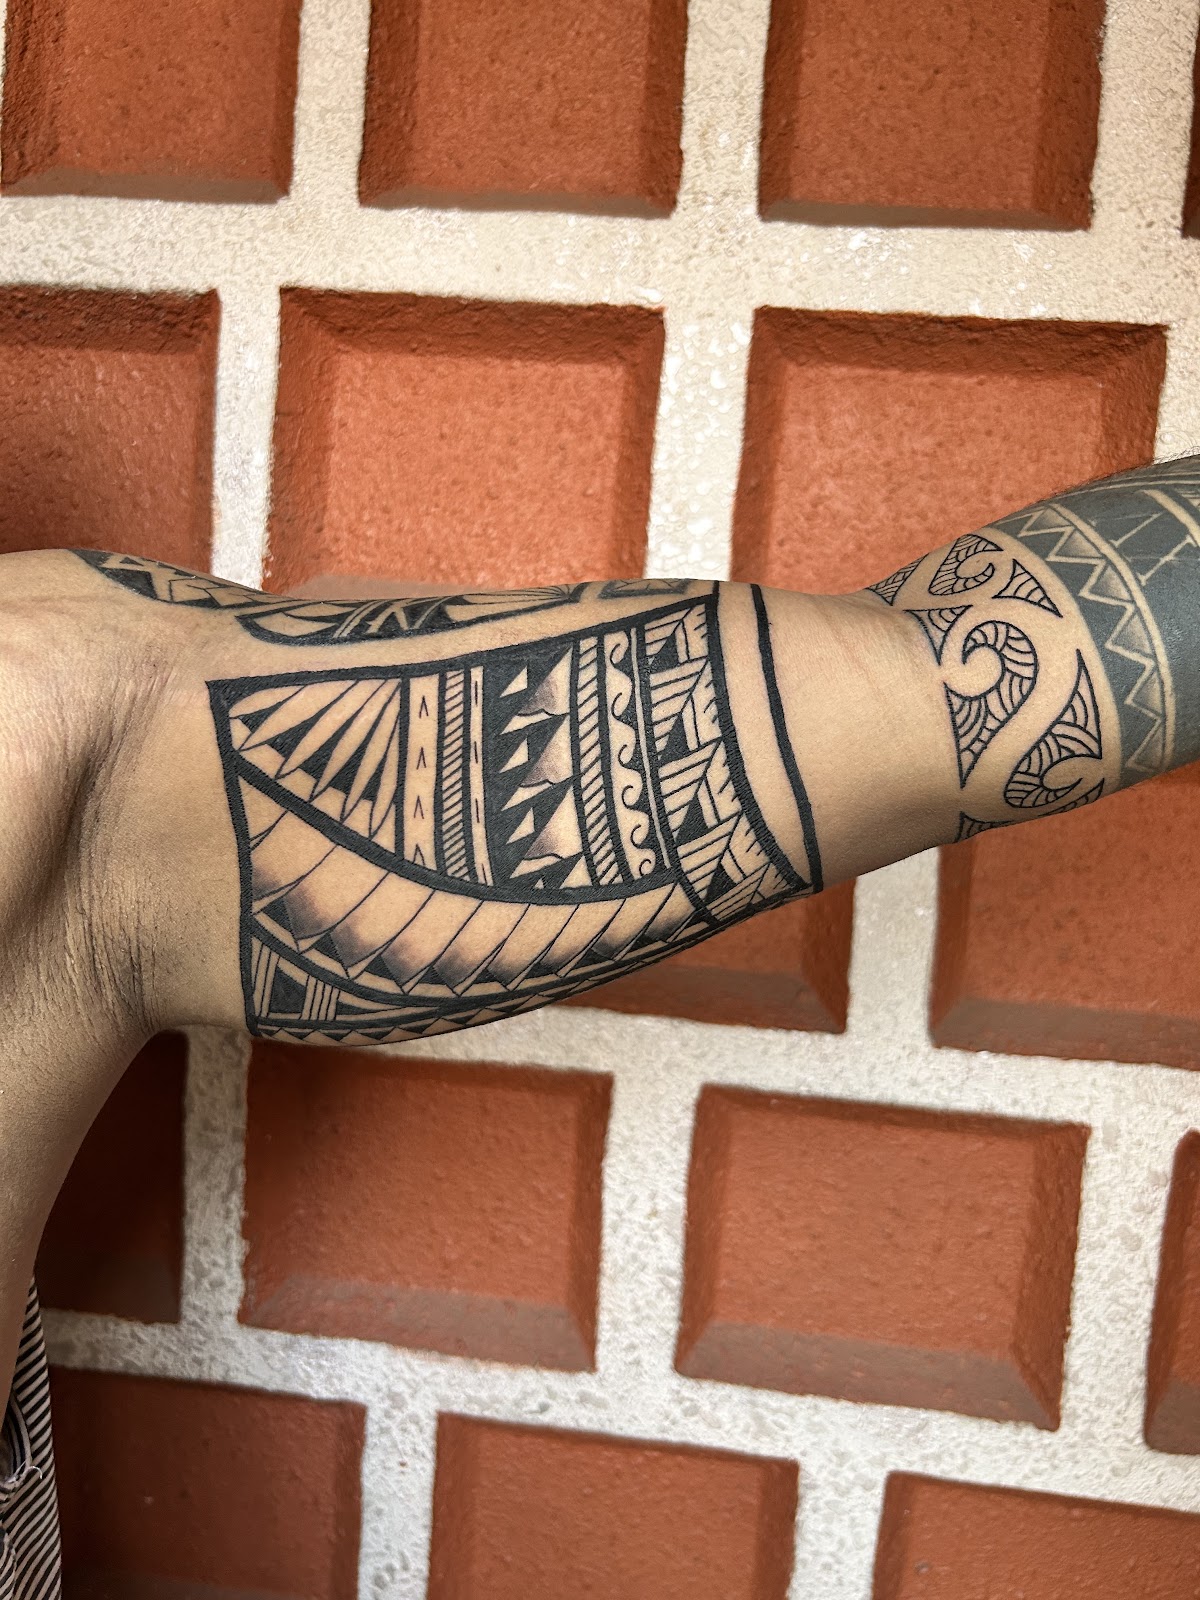 Covering the scar with a tattoo in Bangalore – Nicelocal.in